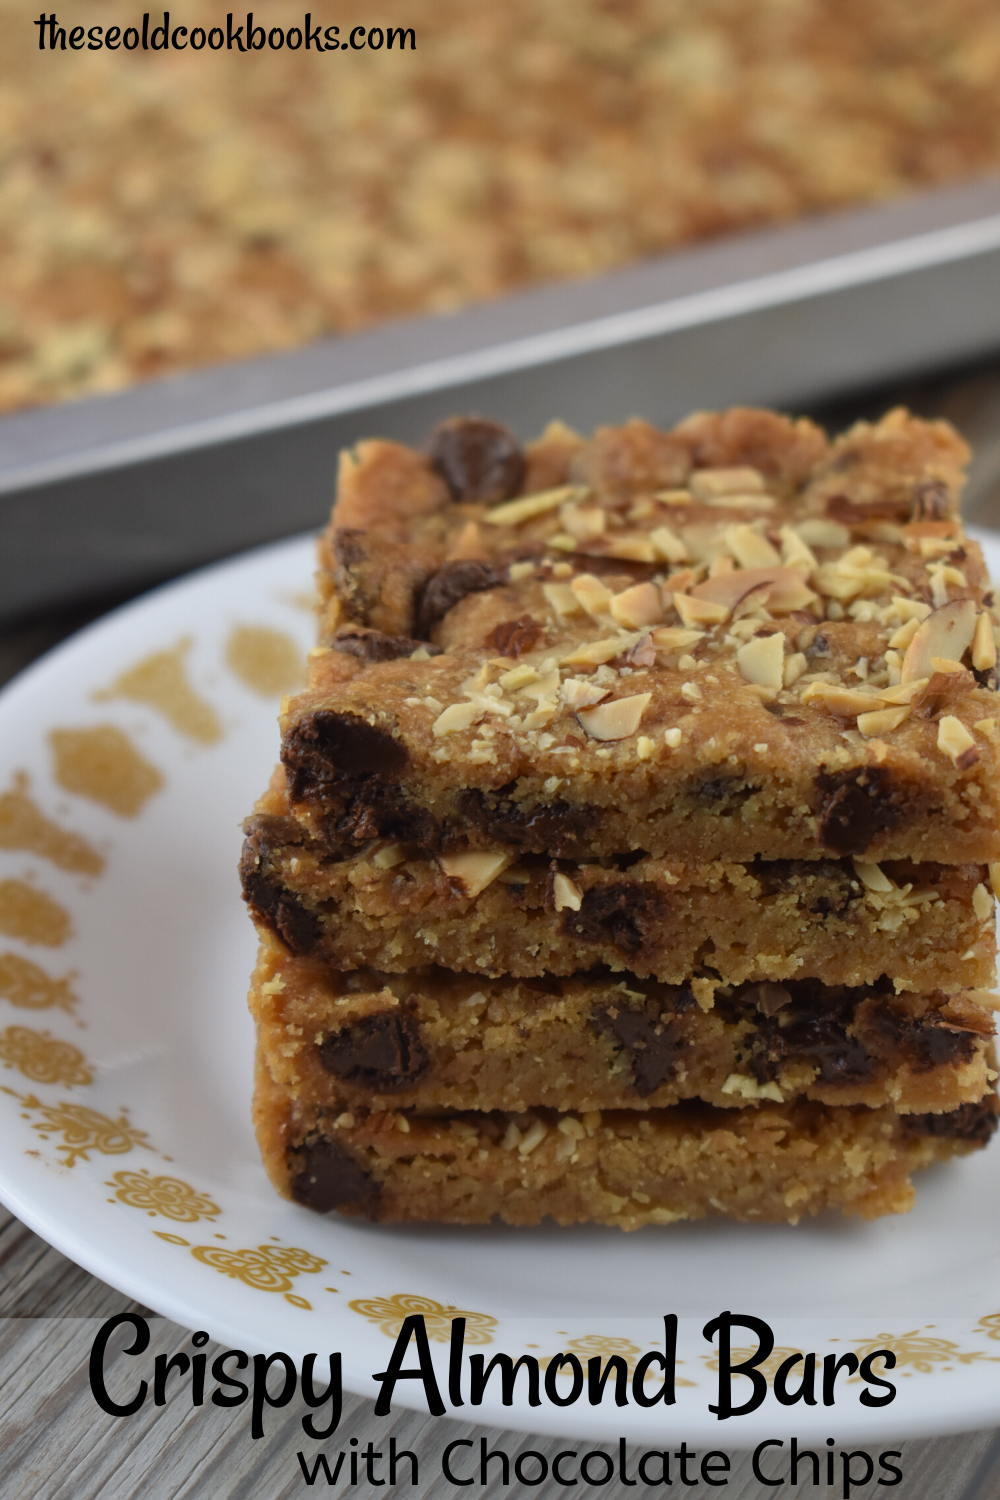 Crispy almond bars are an almond brittle that feature chocolate chips, almond extra and instant coffee powder for the perfect combination of flavors. Cut these into perfect bars or break into irregular brittle bites, and be sure to share with your friends and family. 